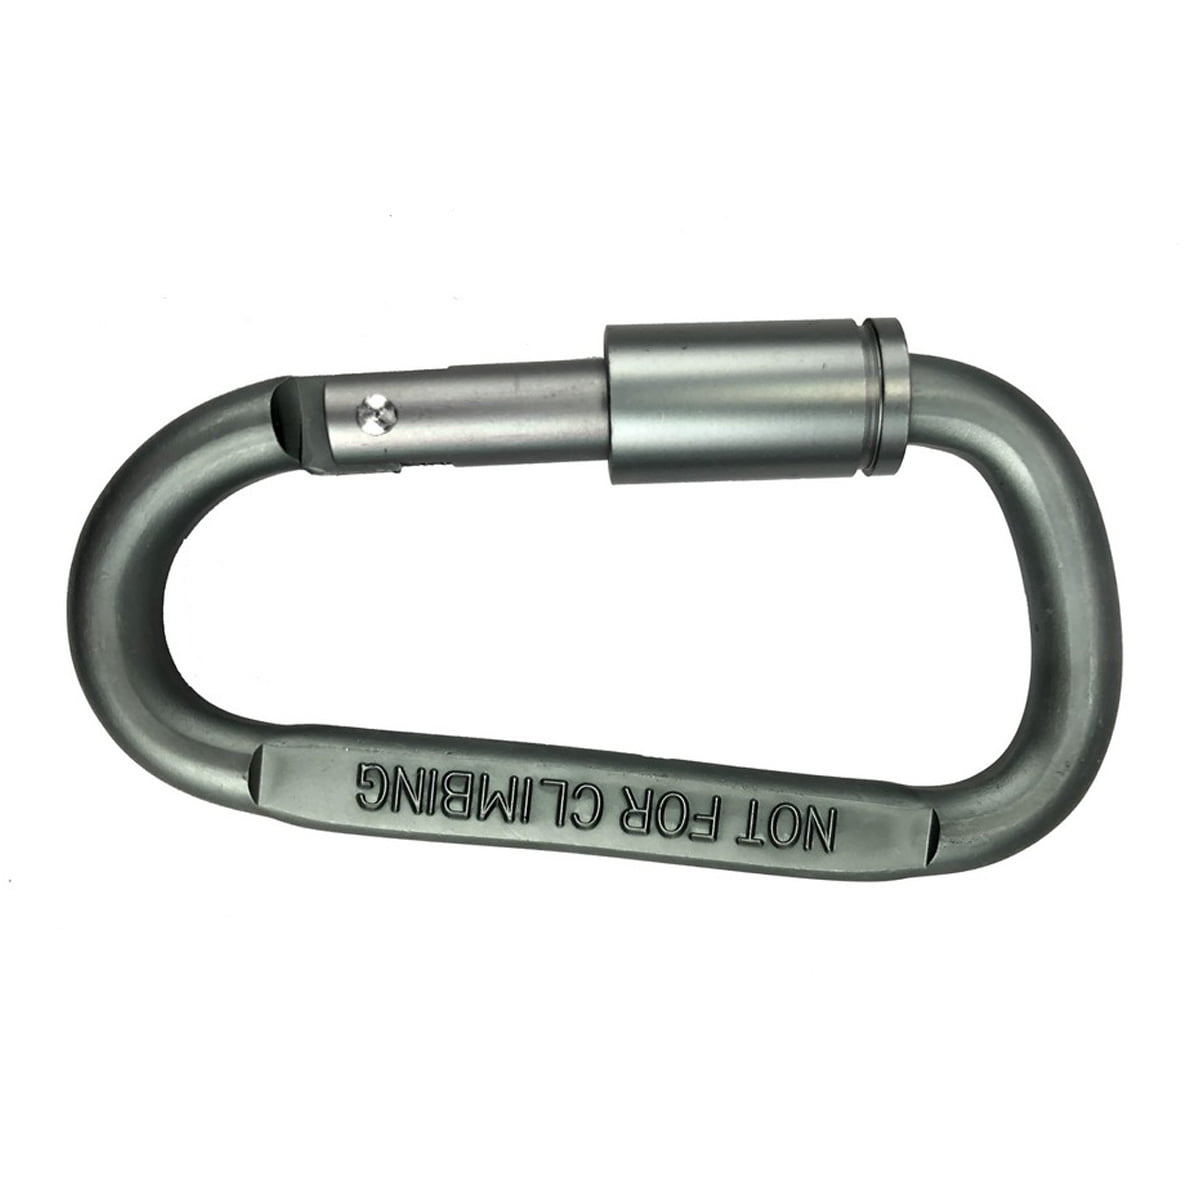 CW_ Titanium Snap Key Chain Ring Clip Carabiner Outdoor Buckle Hook Keychain Nov 